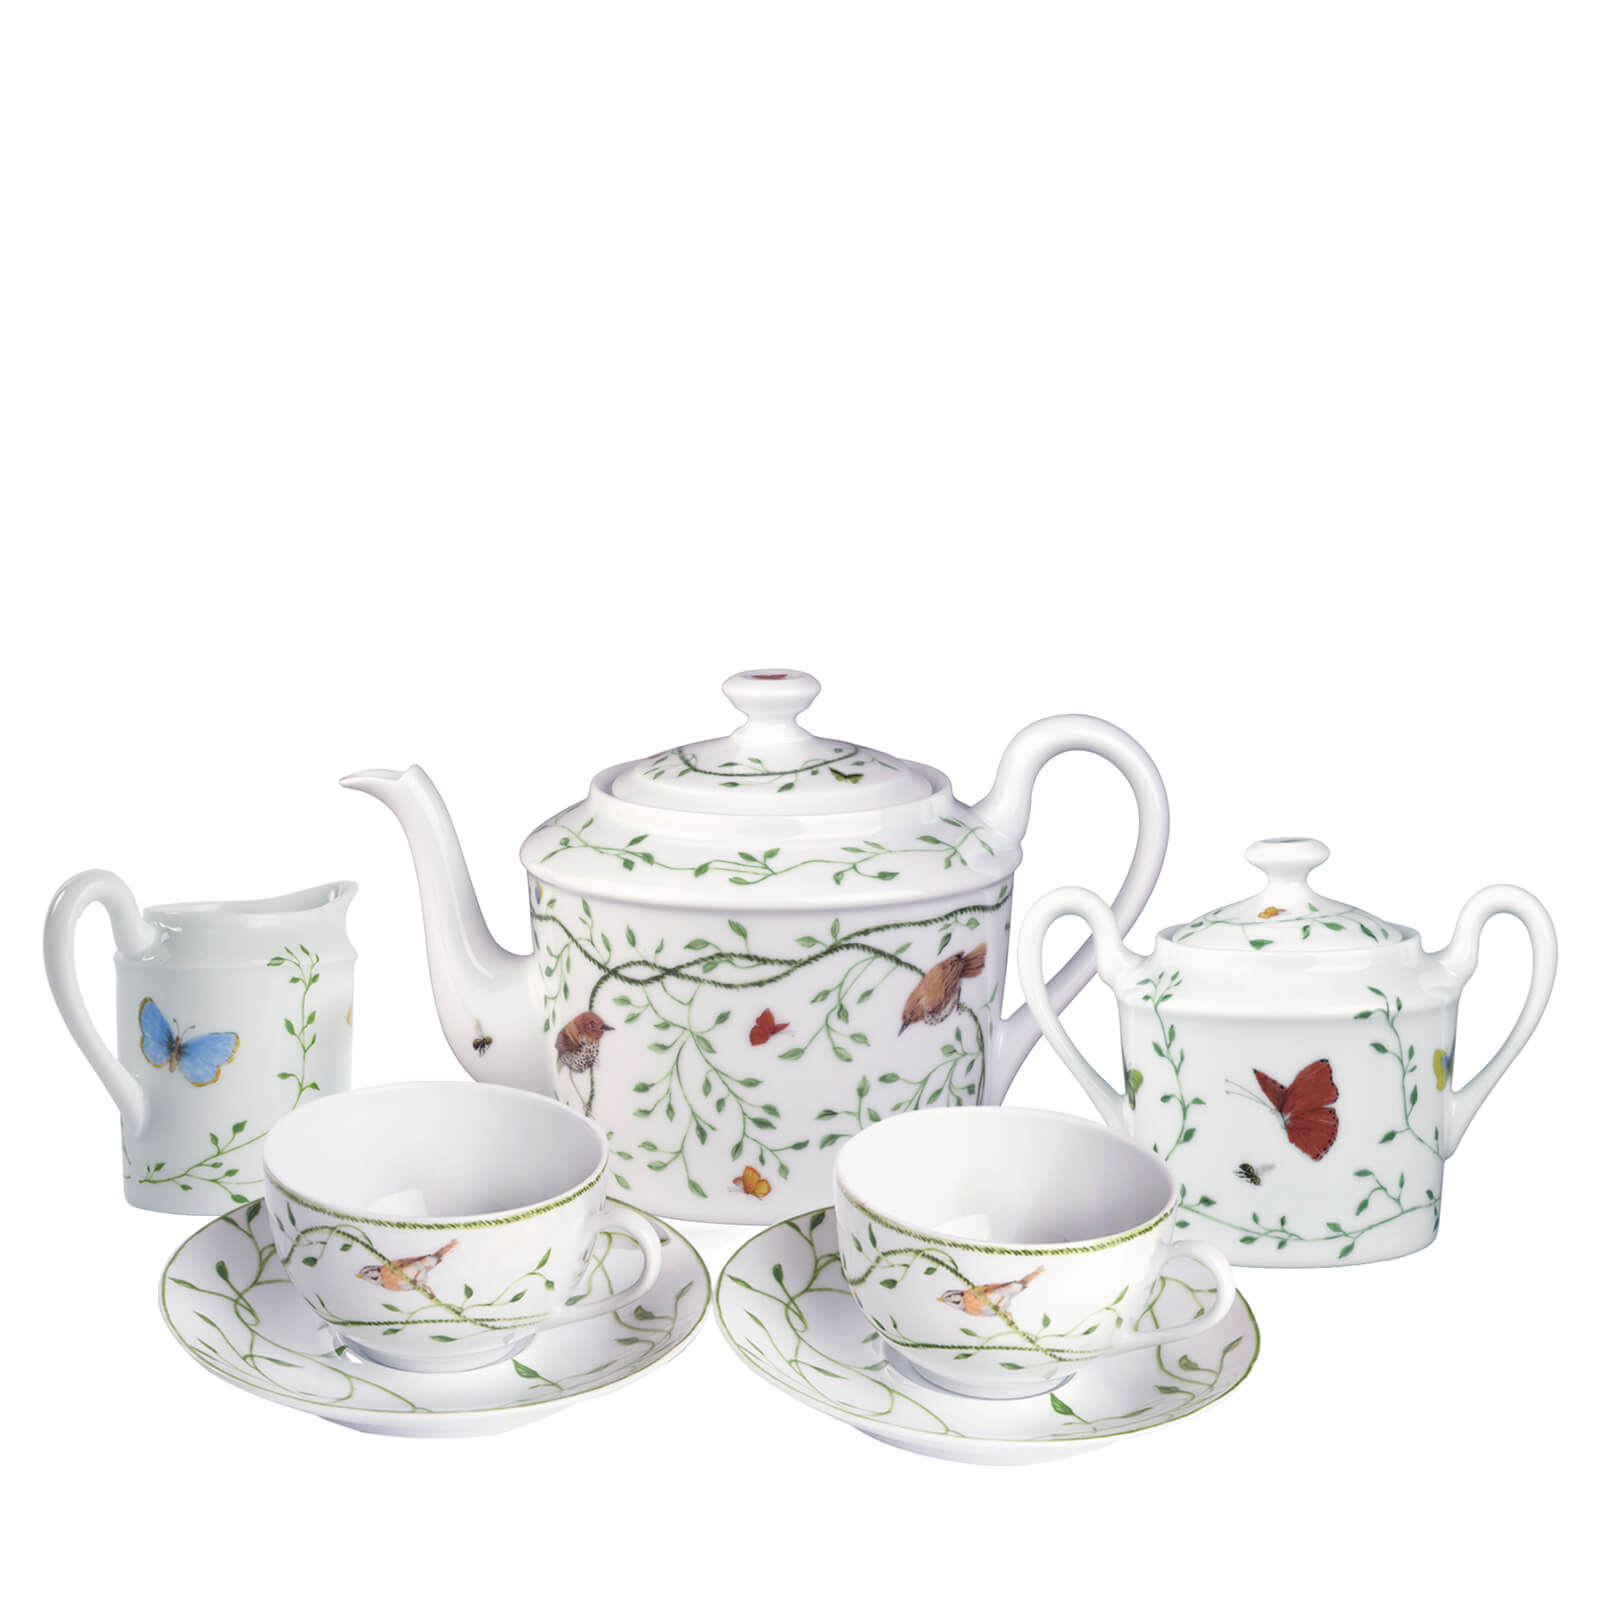 Raynaud Set of Two Tea Cups, Saucers, Teapot, Sugar Bowl & Creamer - Oetker Collection Hotels Boutique